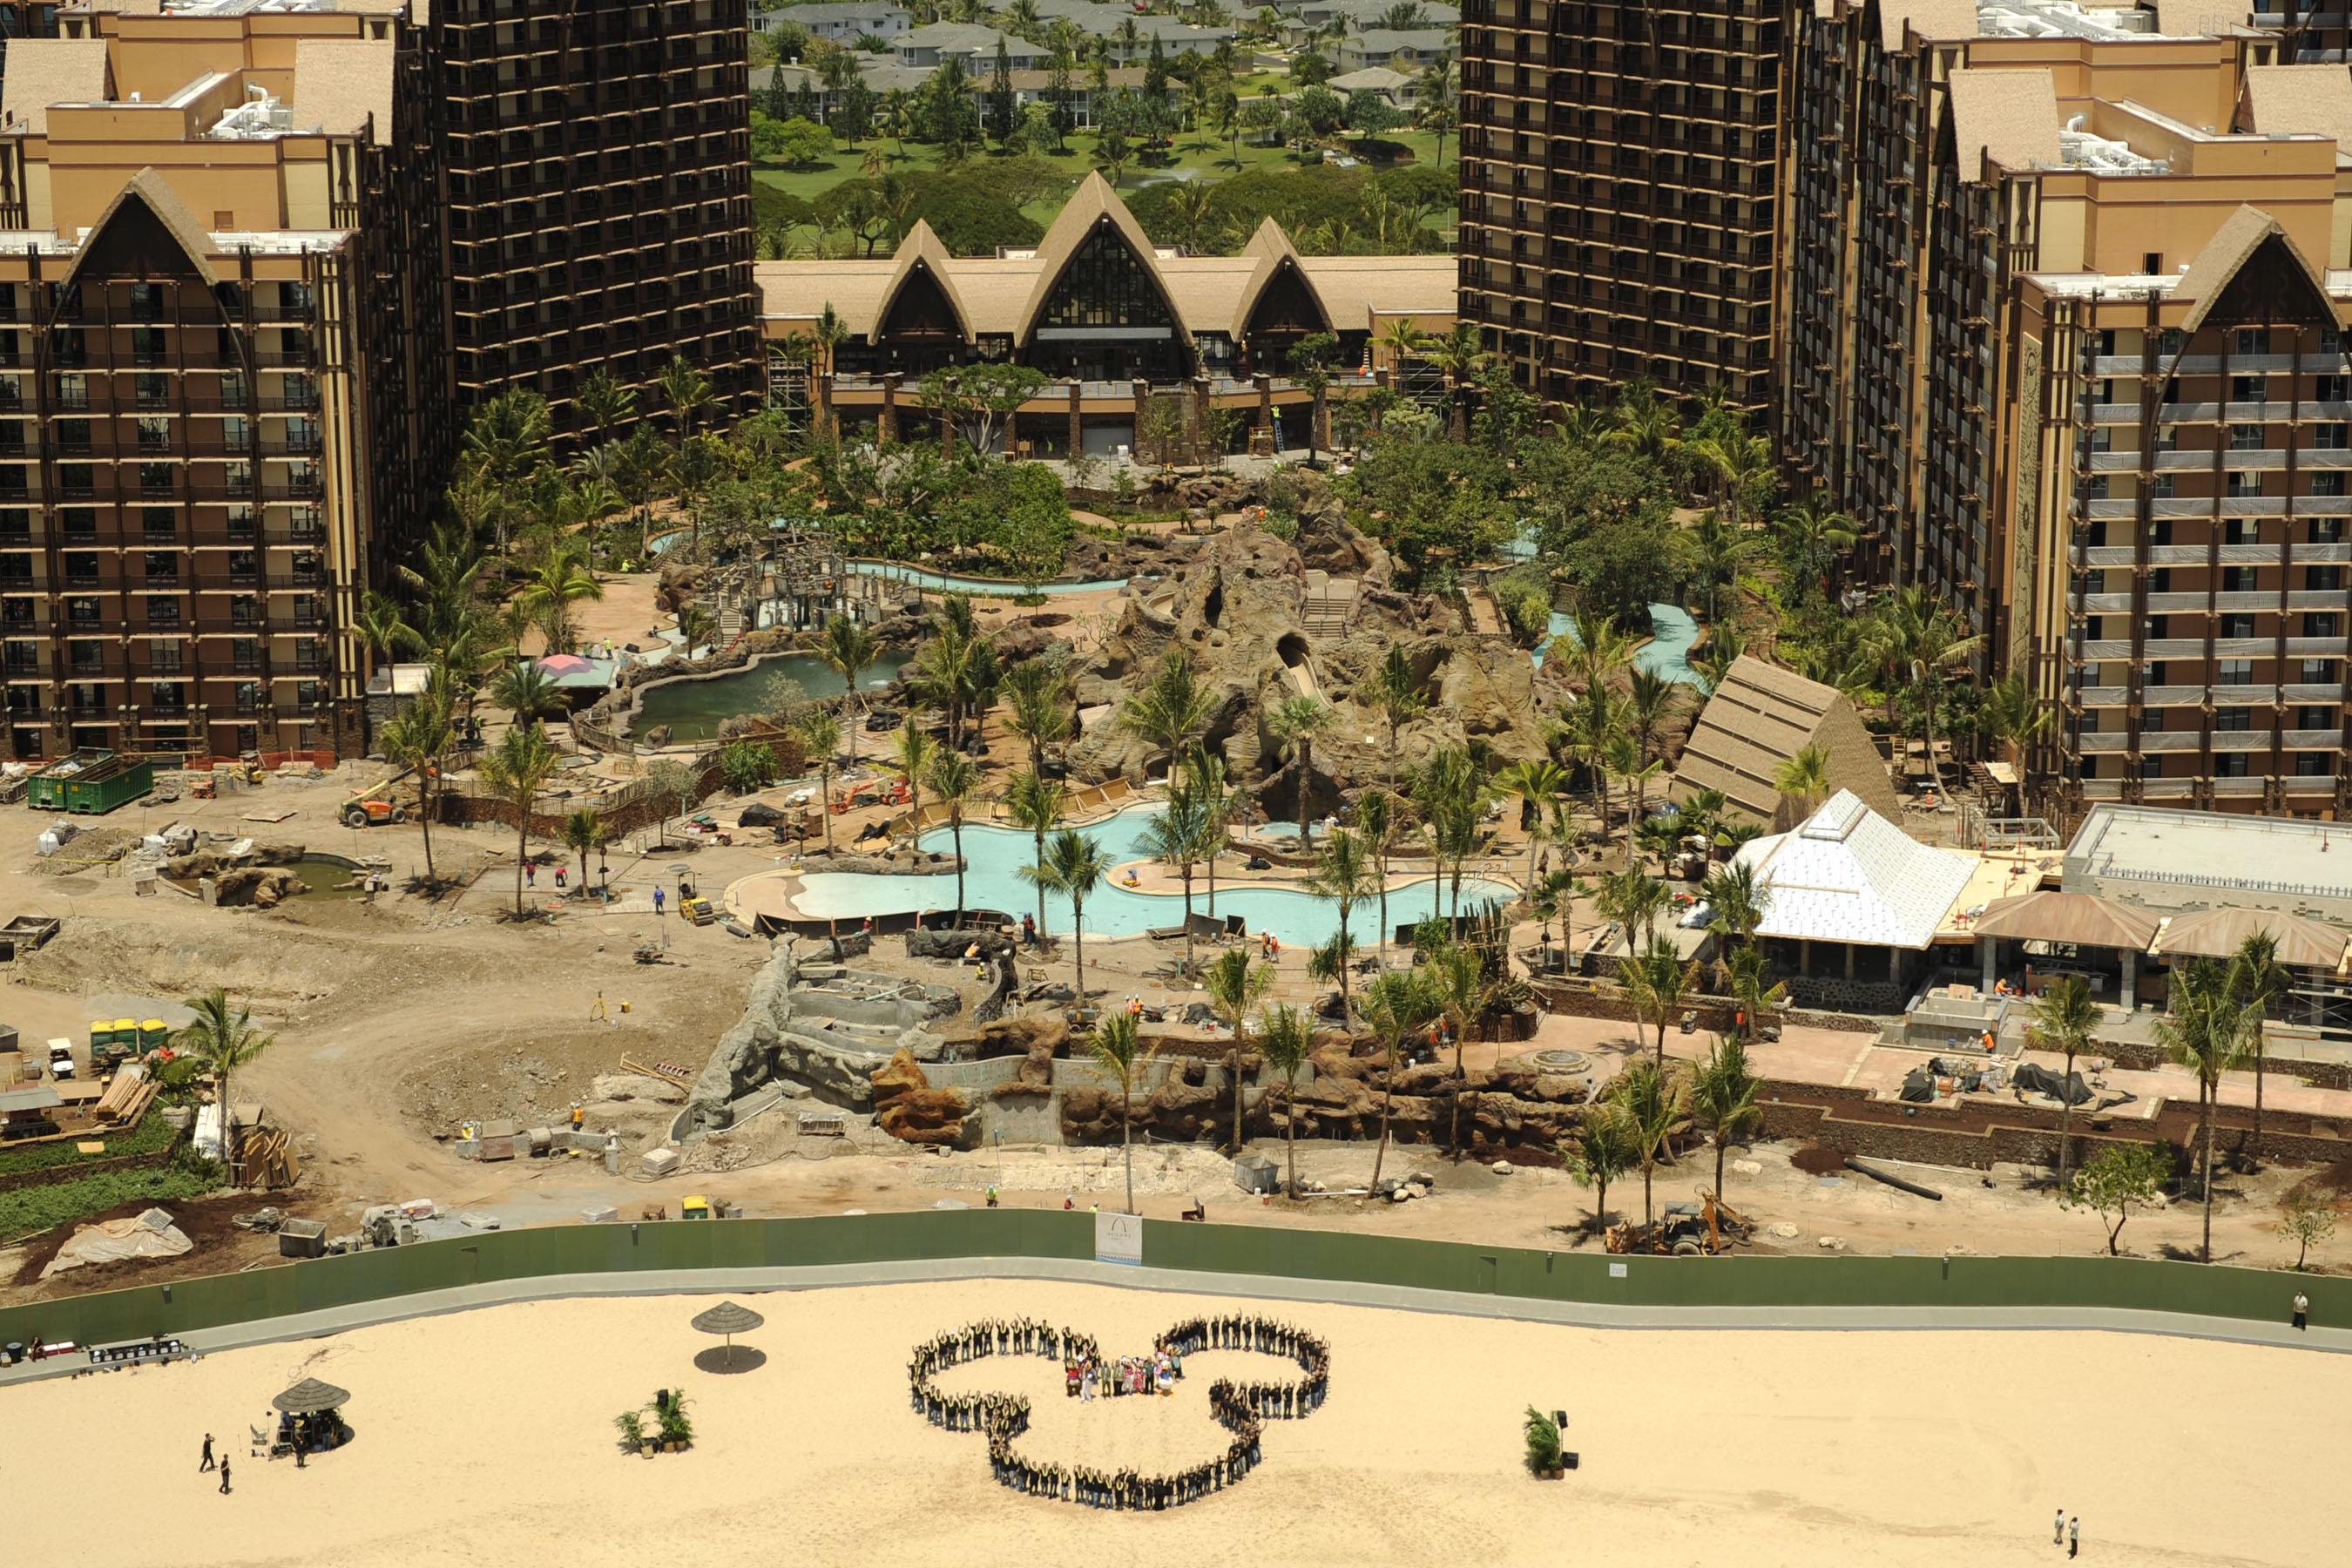 Aulani, a Disney Resort and Spa, opened on the shores of Oahu island on August 2011